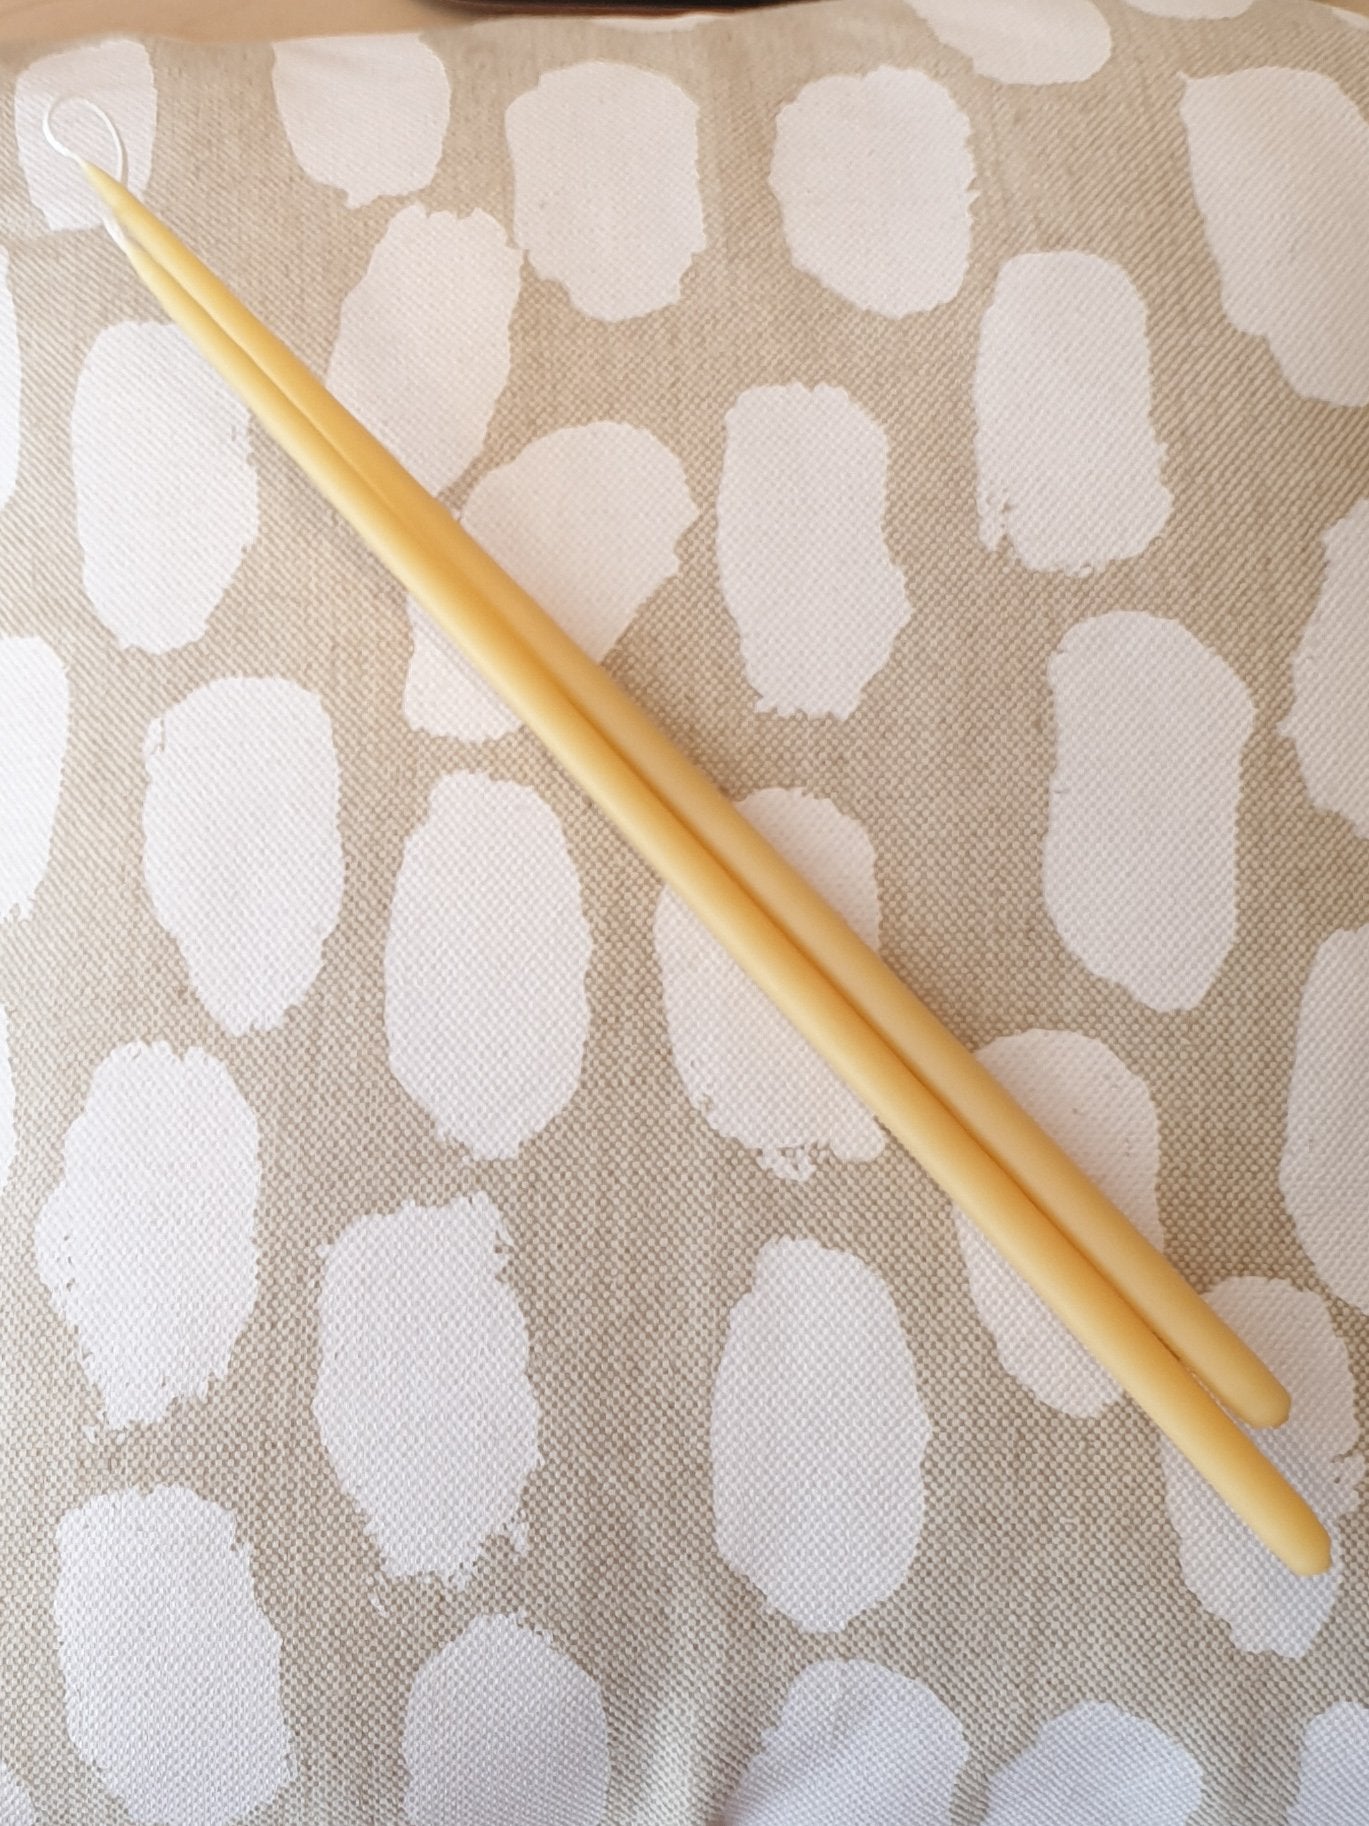 Long Thin Taper Beeswax Candles